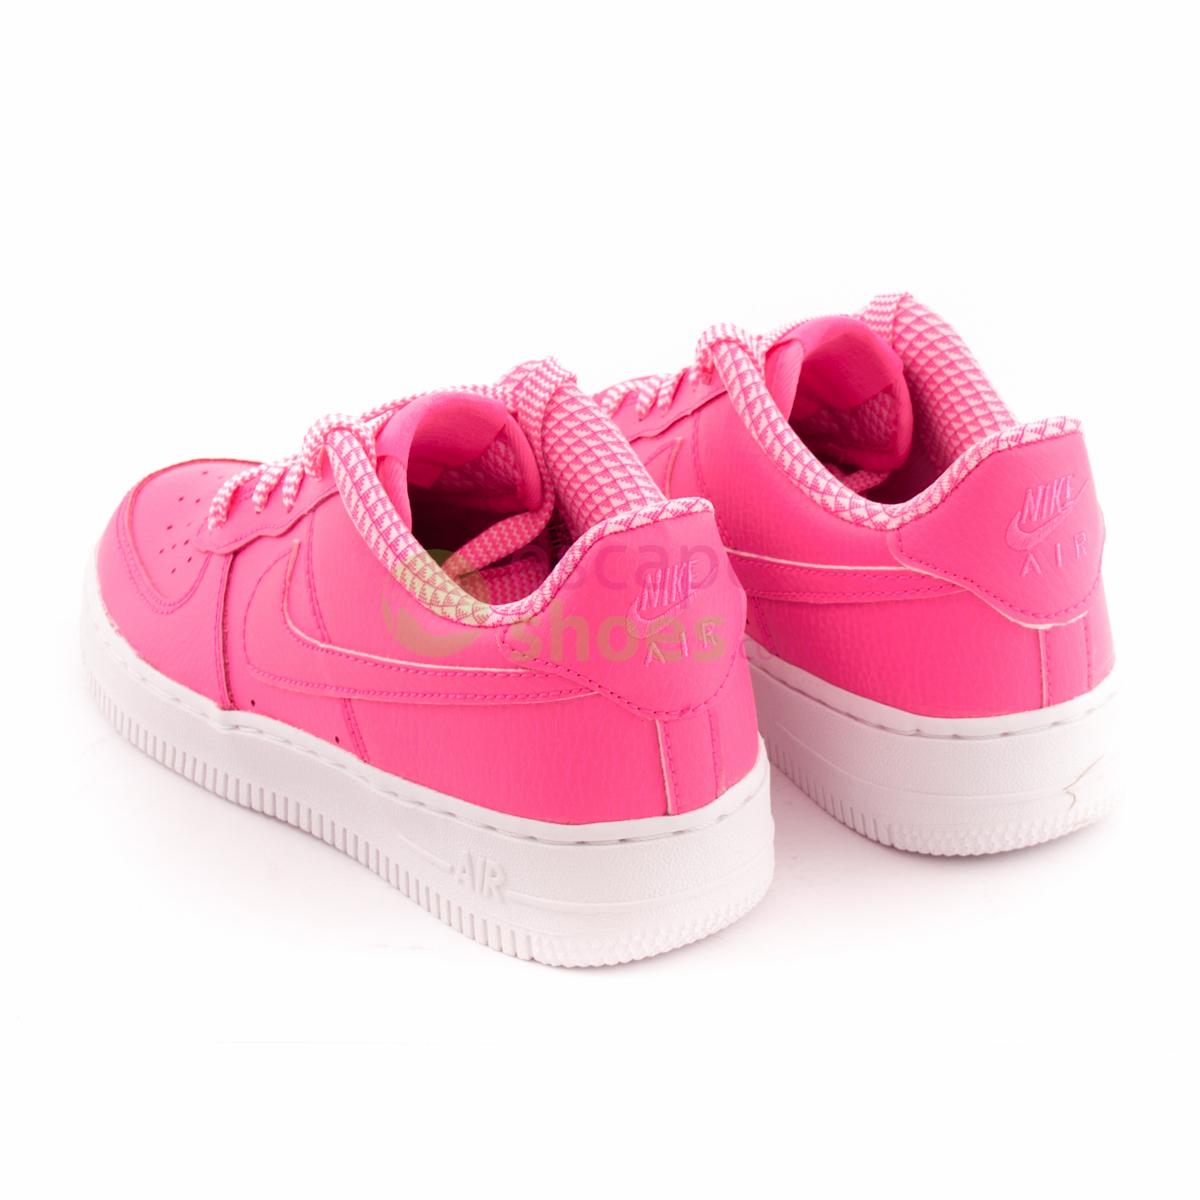 Sneakers Nike Air Force 1 Gs Pink Pow White 615